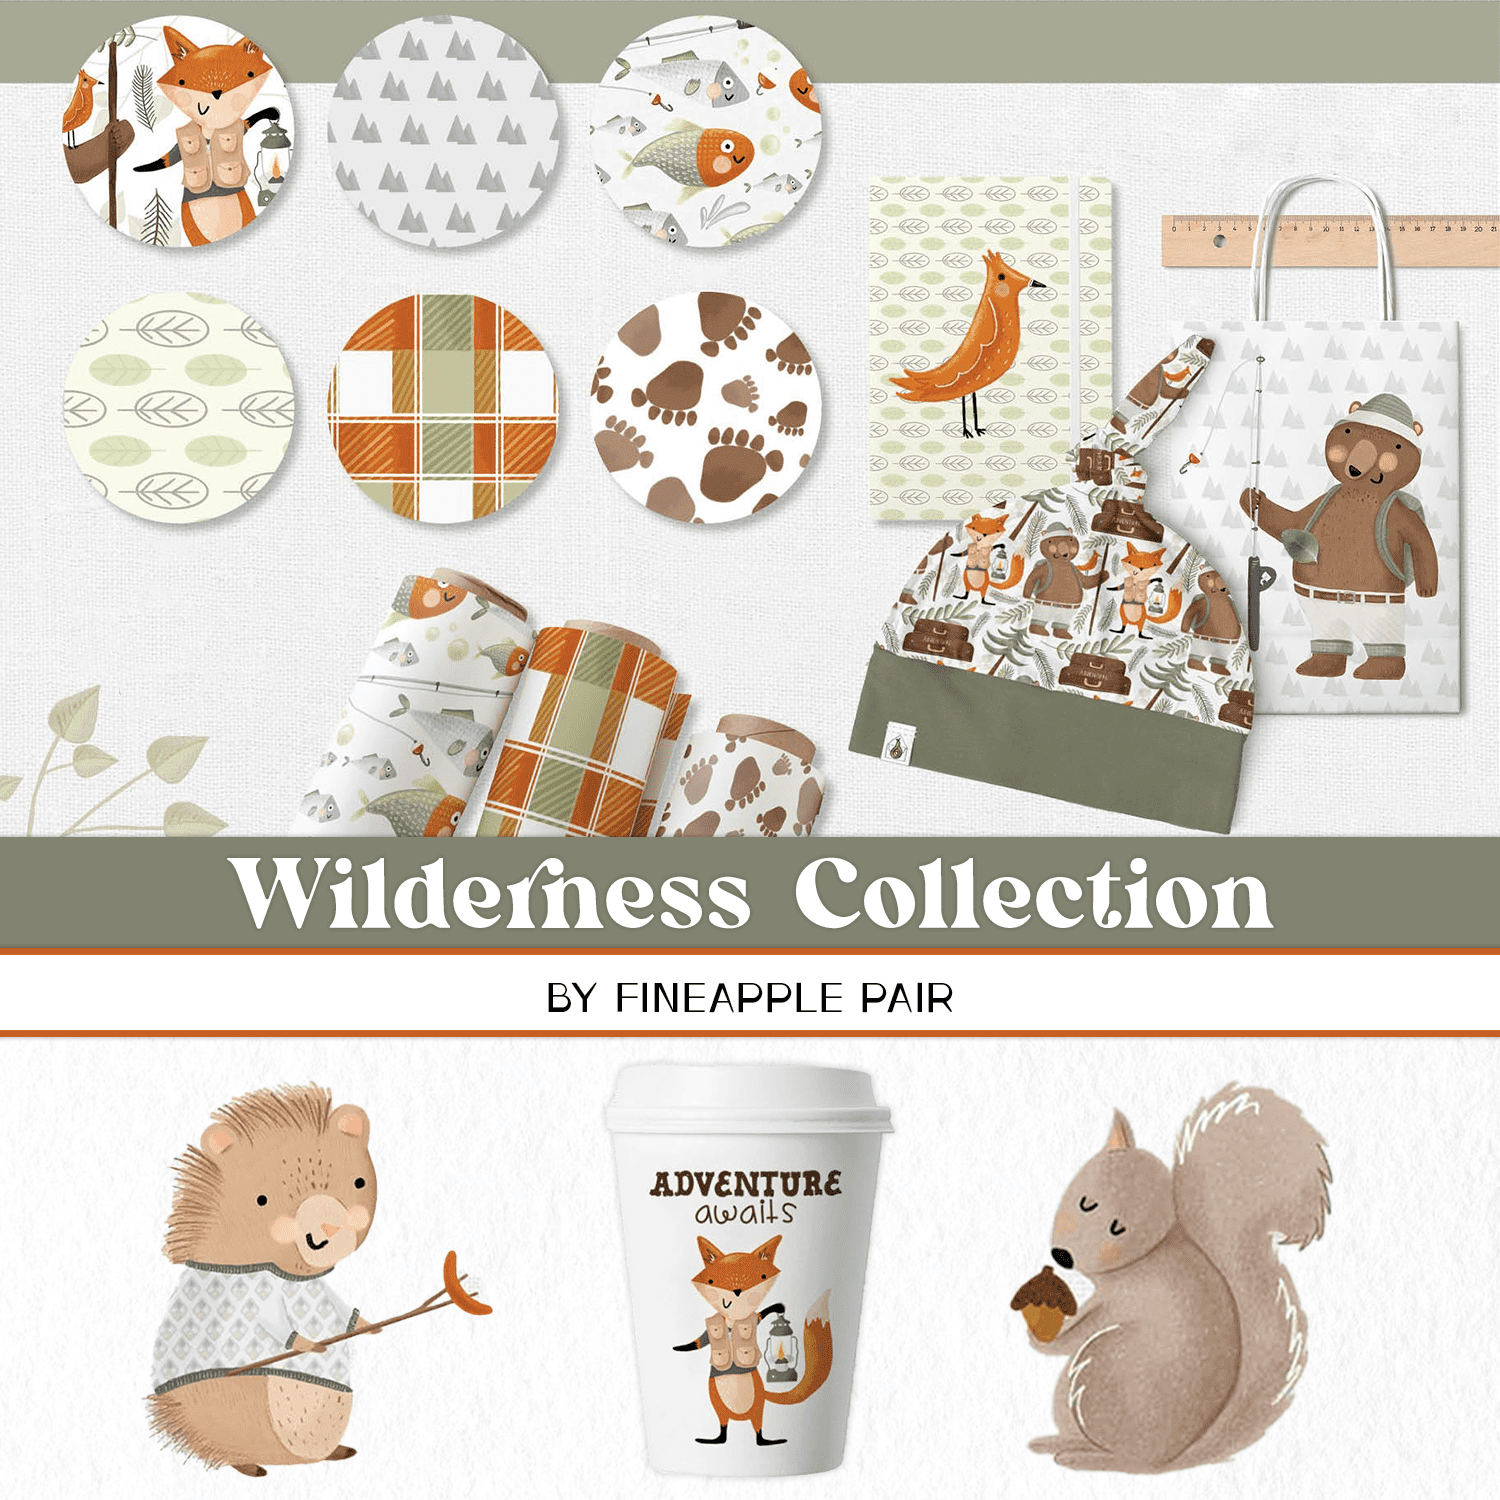 Wilderness Collection,